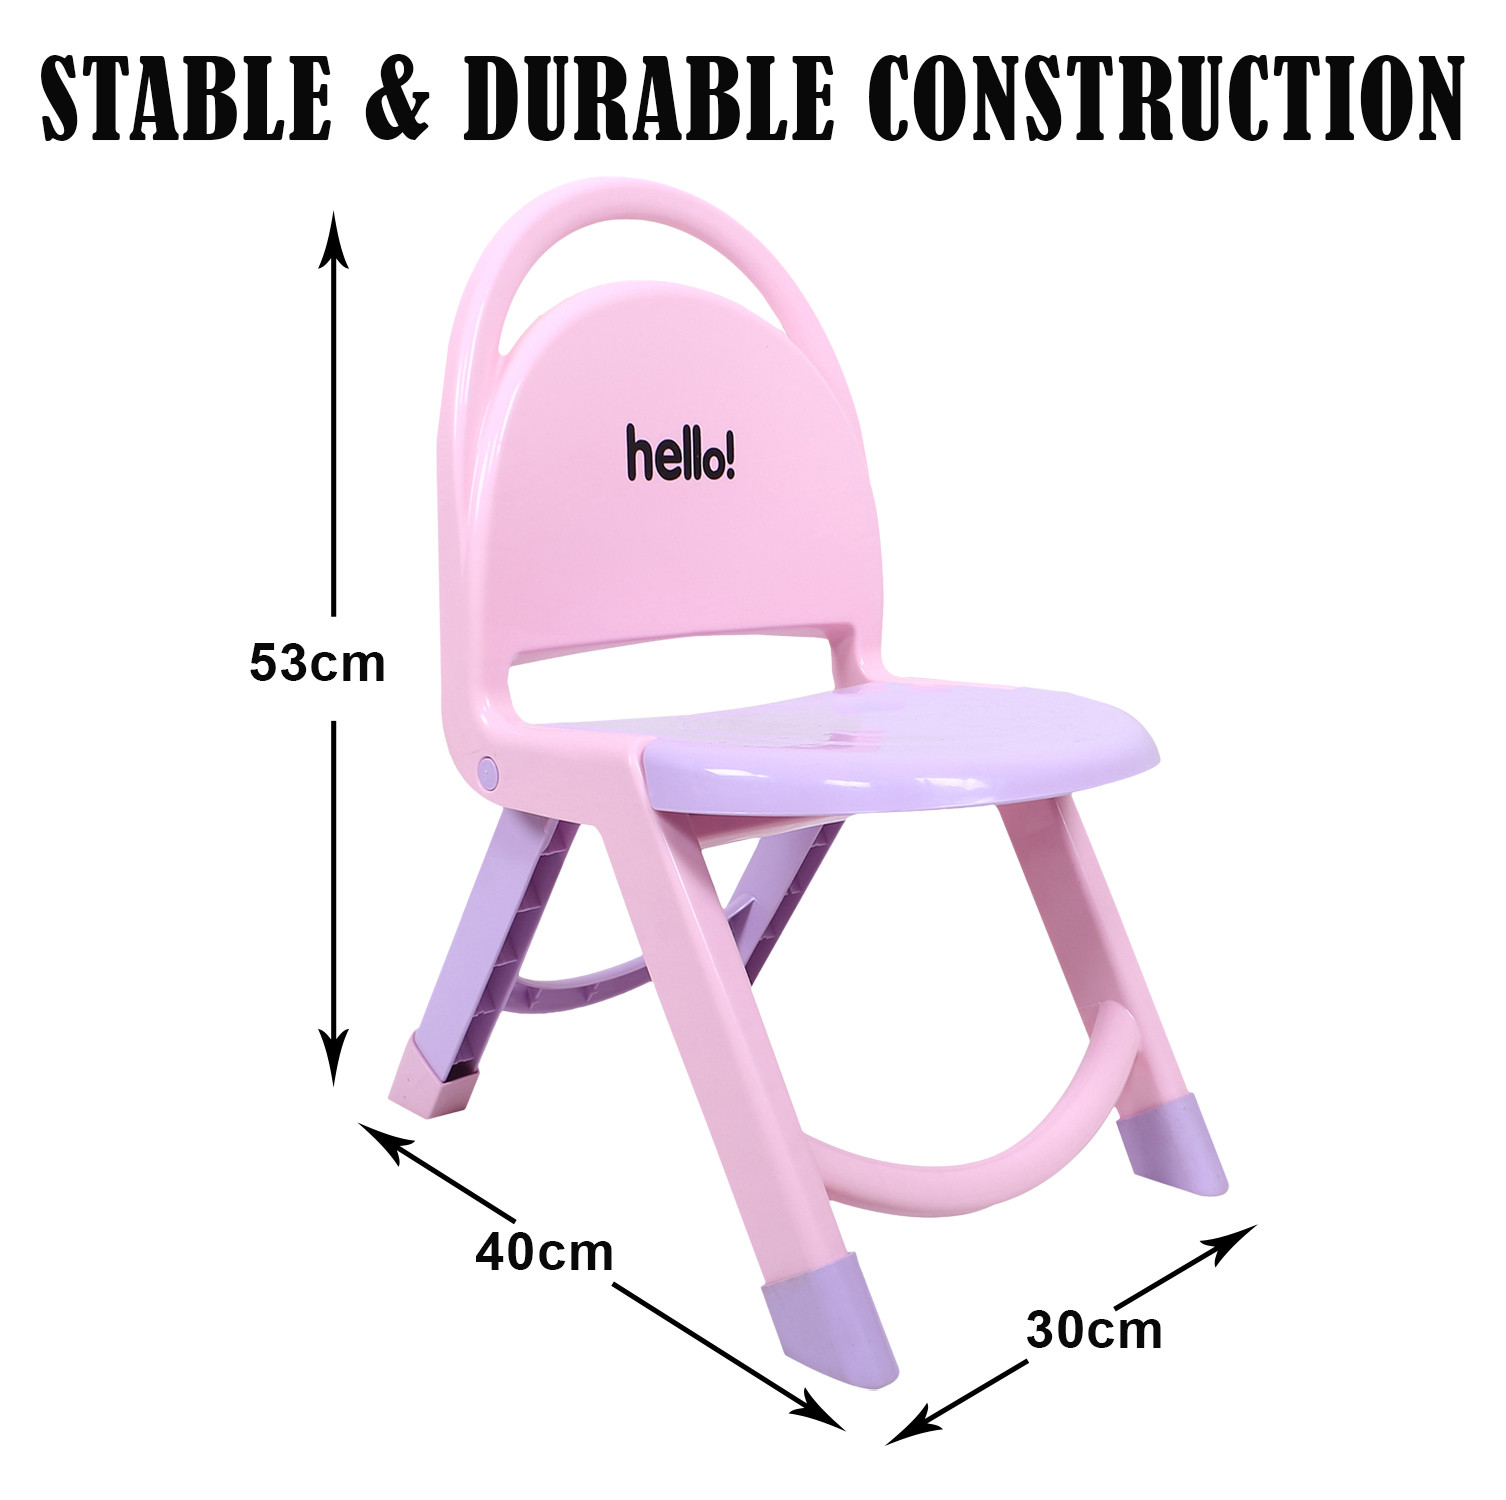 Kuber Industries Chair for Kids | Plastic Kids Foldable Chair | Baby Chair | School Study Chair | Toddler Chair | Indoor or Outdoor Use for Kids | Capacity 80 Kg | Purple & Pink